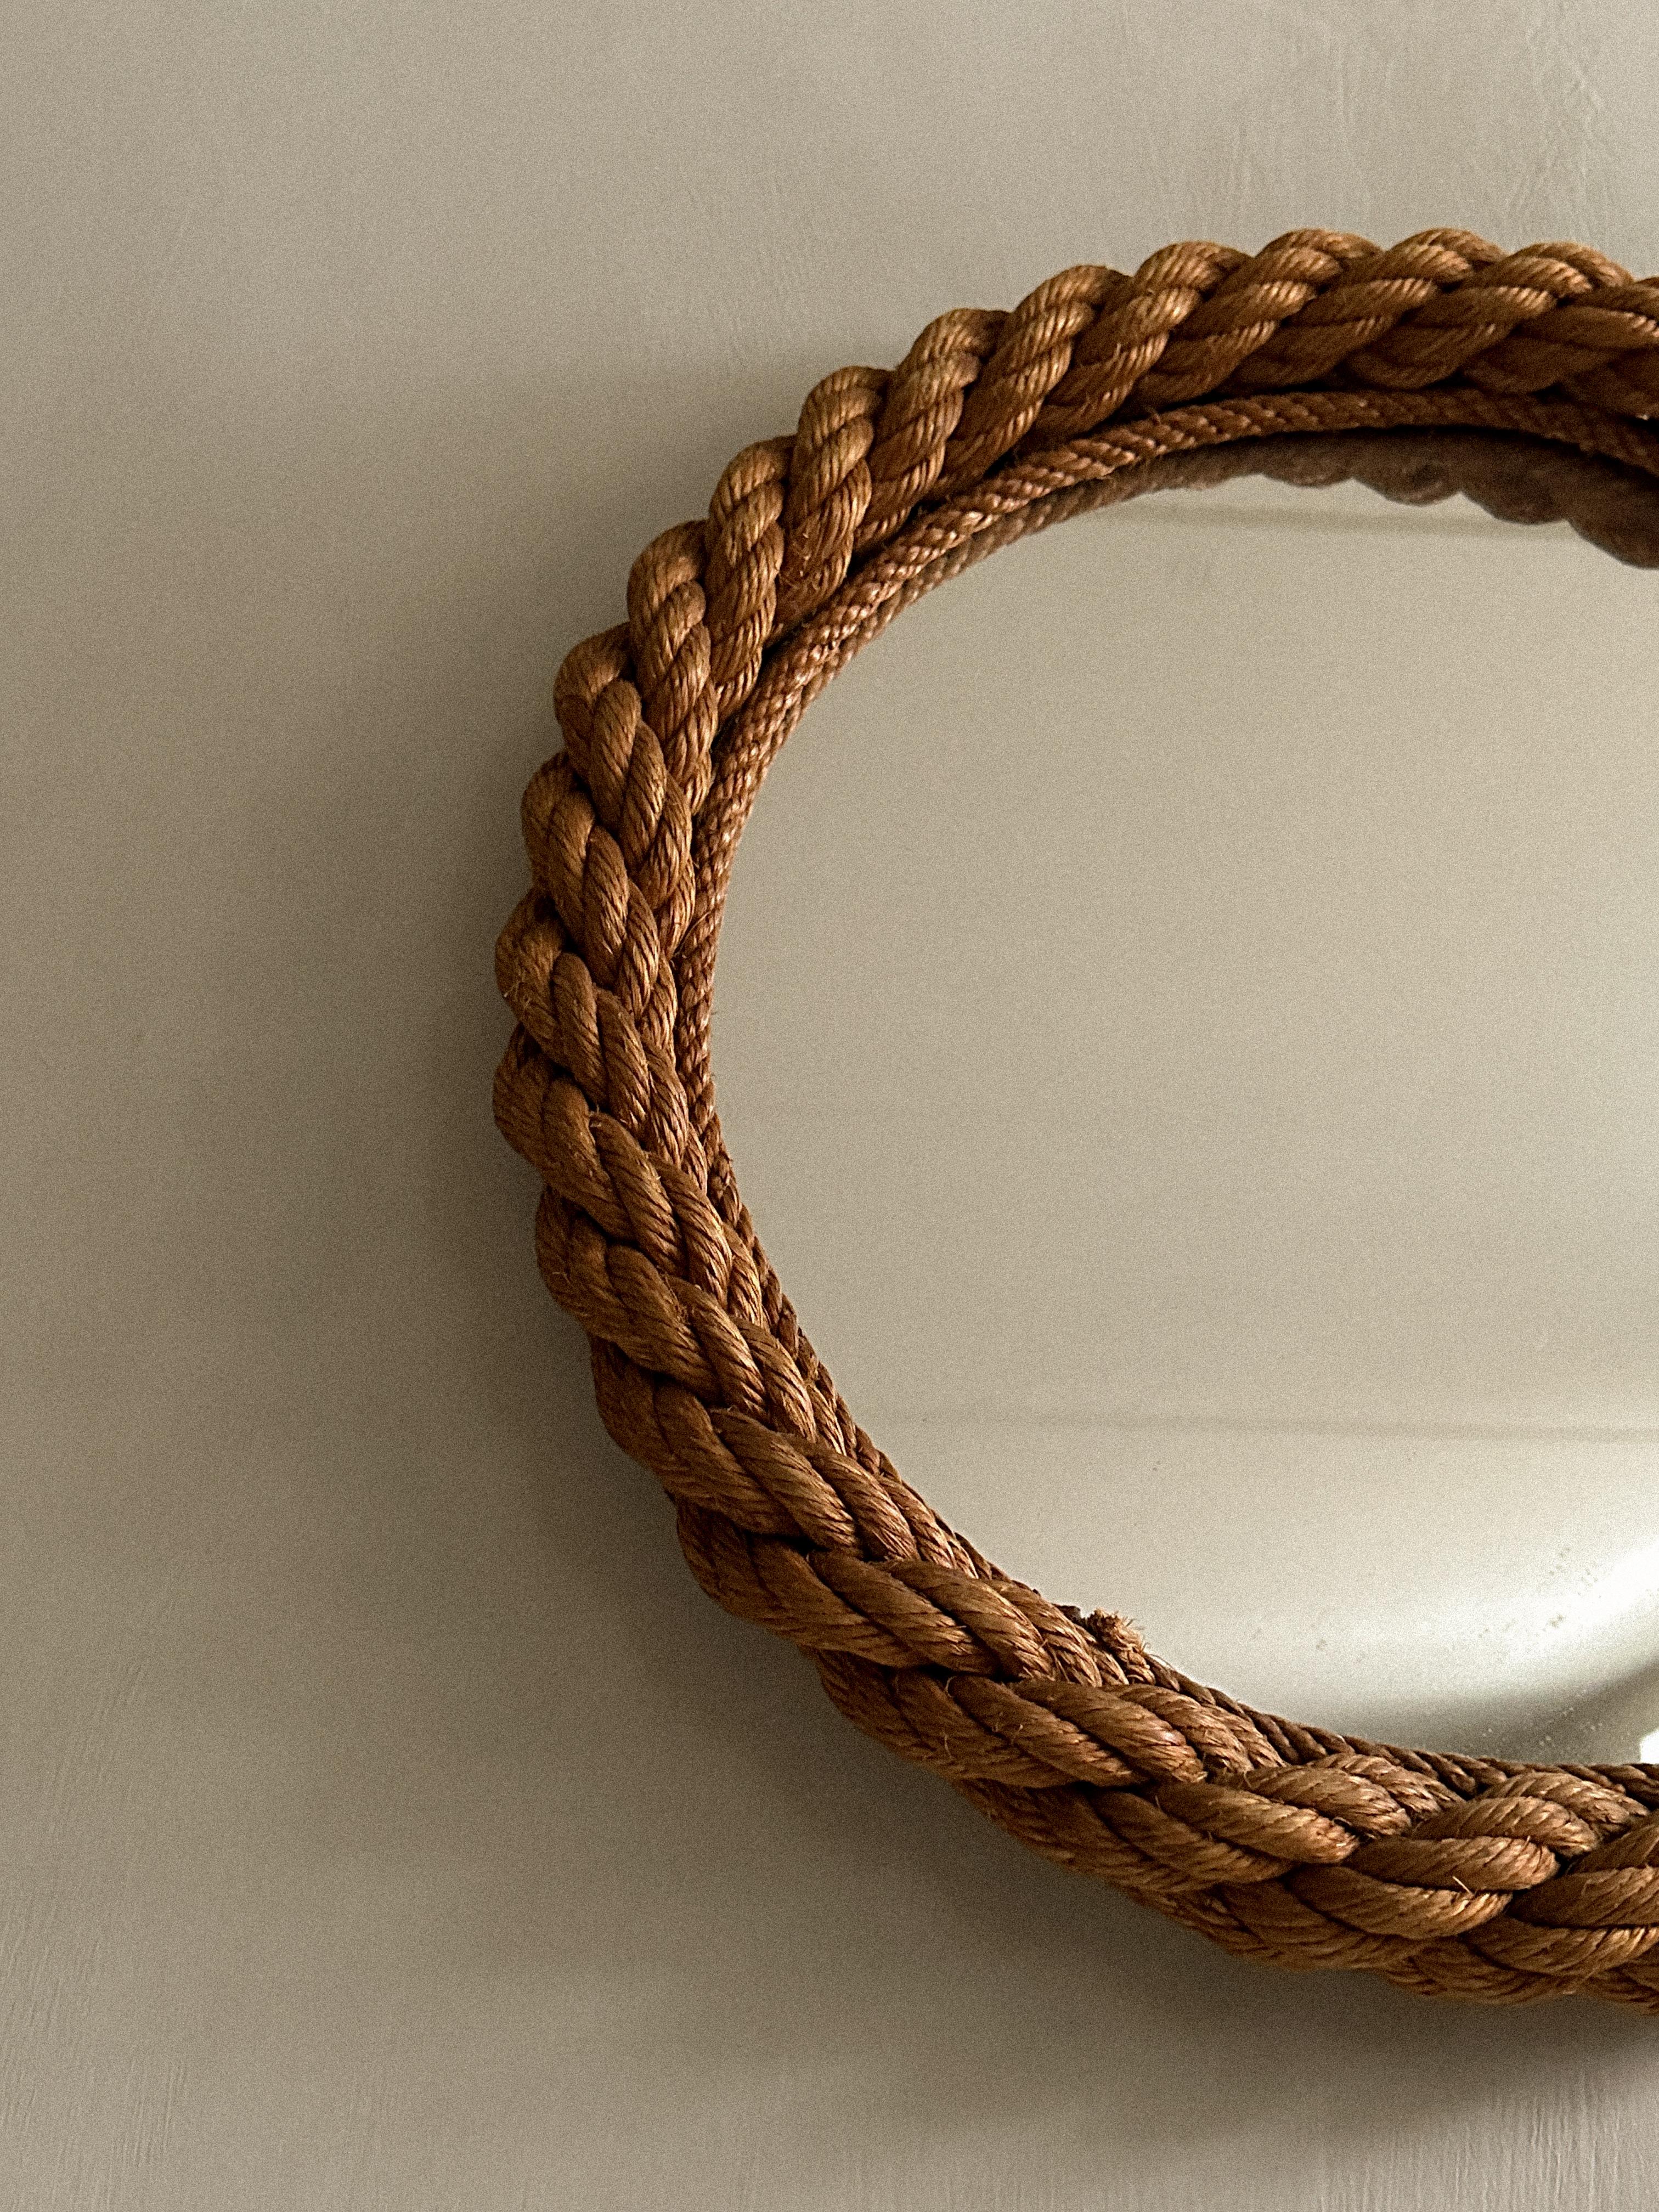 A Vintage Round Rope Mirror by Adrien Audoux and Frida Minet, France, c. 1960s In Good Condition For Sale In Hønefoss, 30